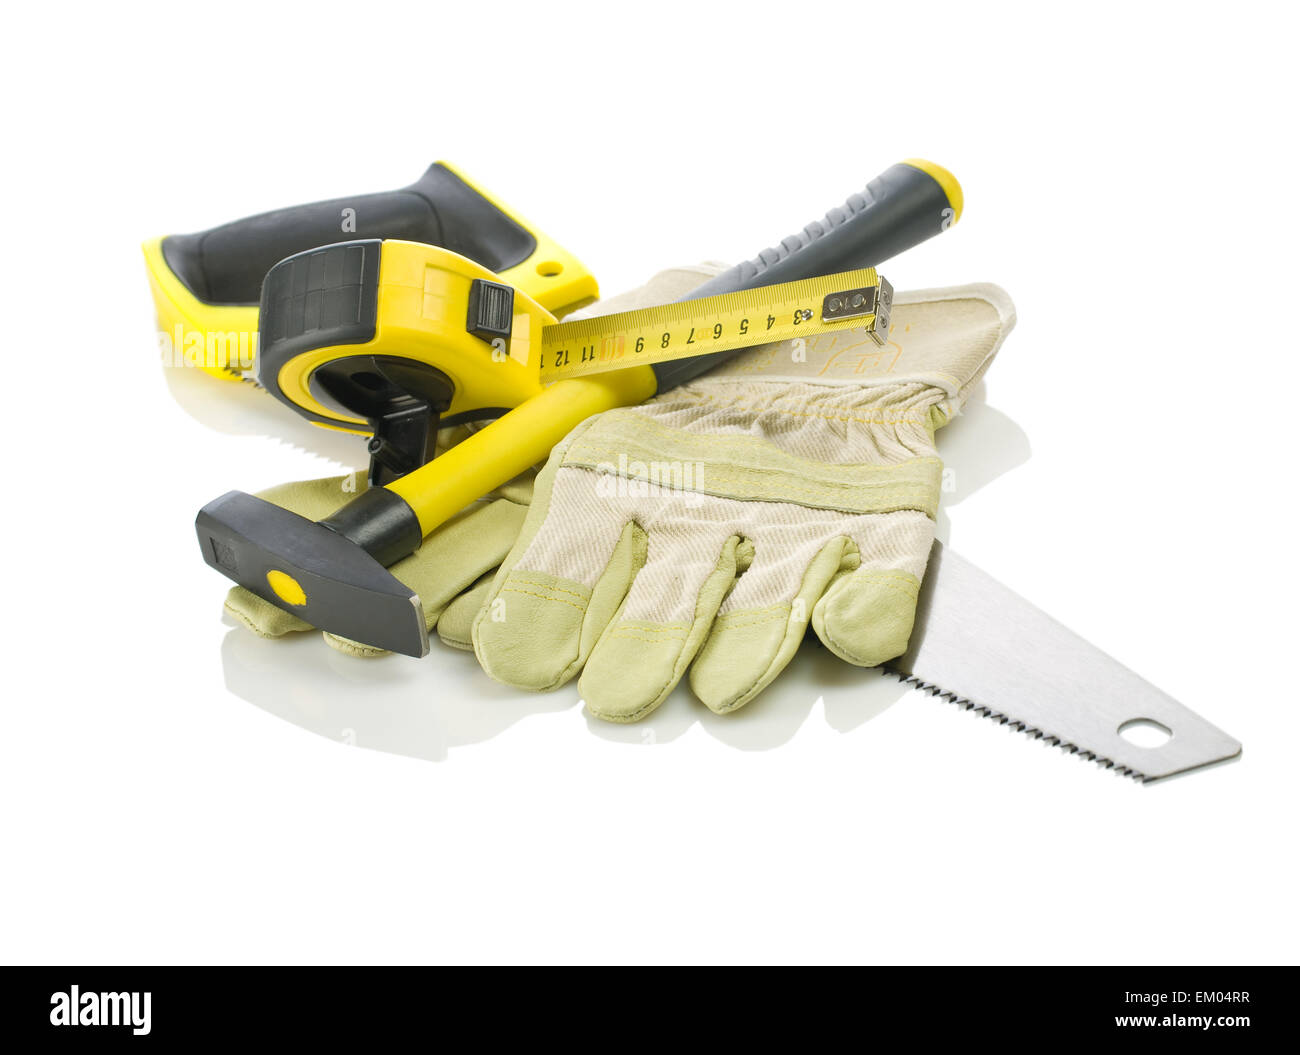 Gloves, tapeline, saw and hammer Stock Photo